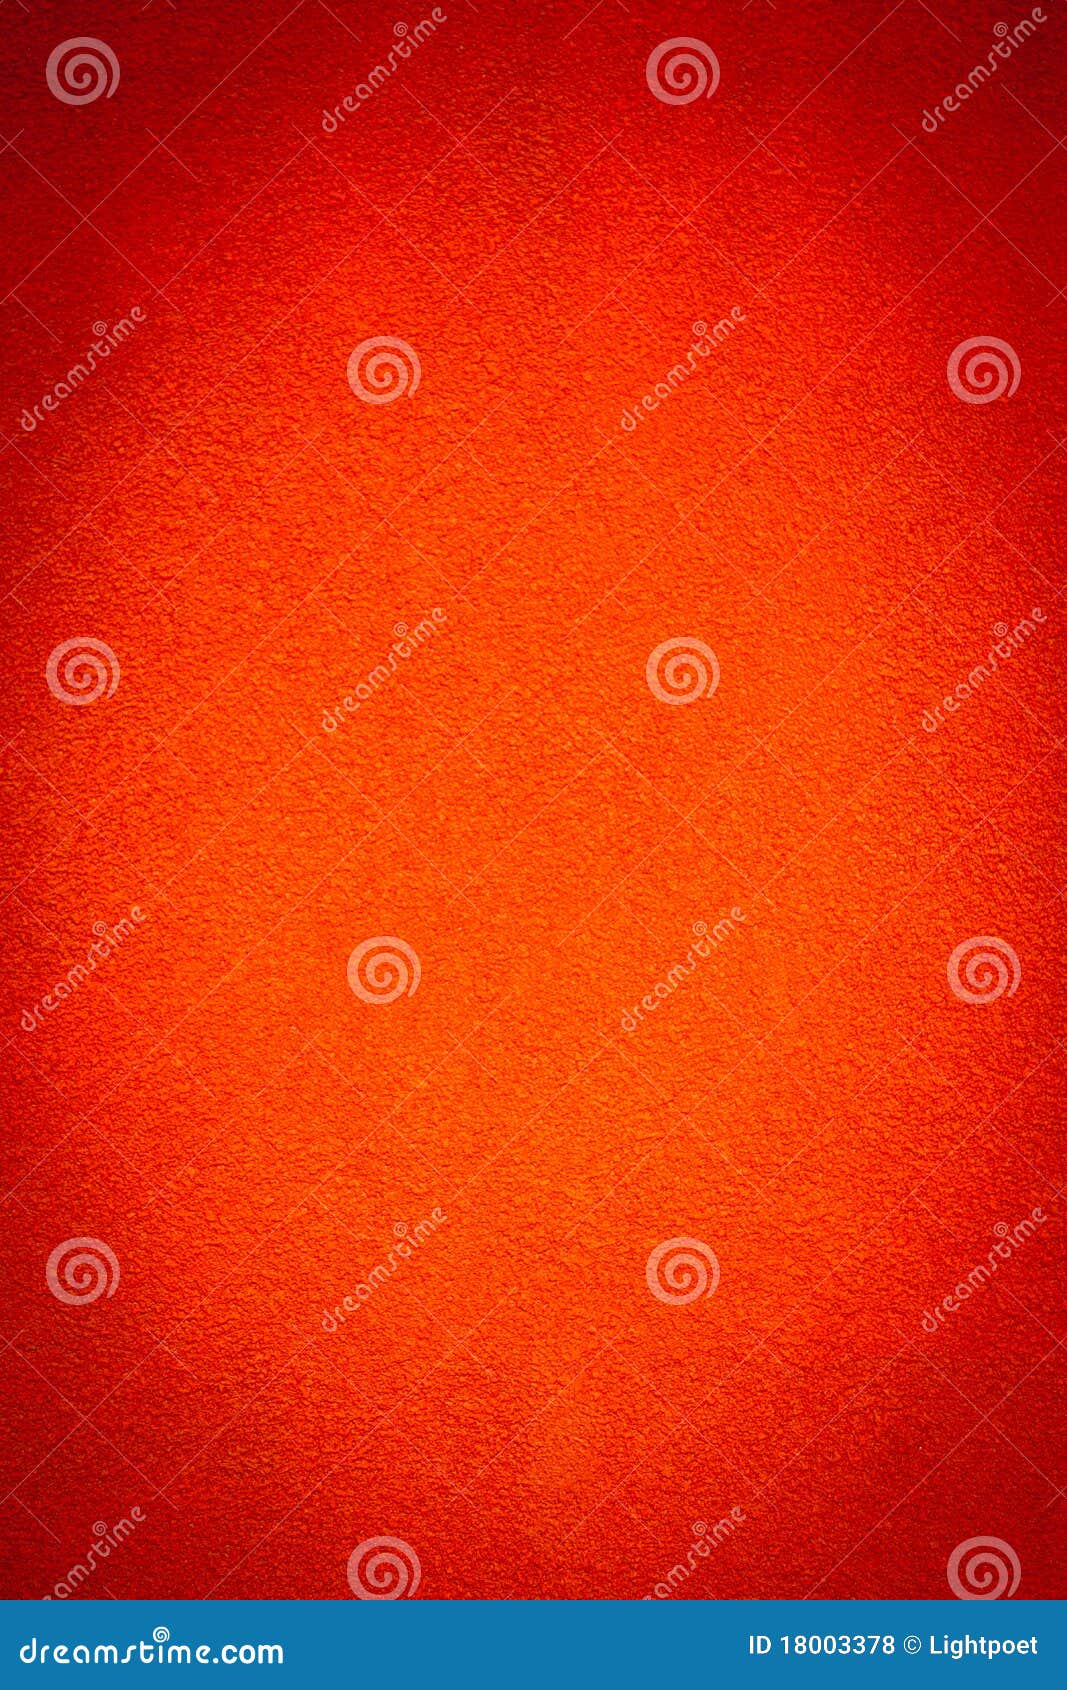 Plain red background stock photo. Image of backdrop, sign - 18003378